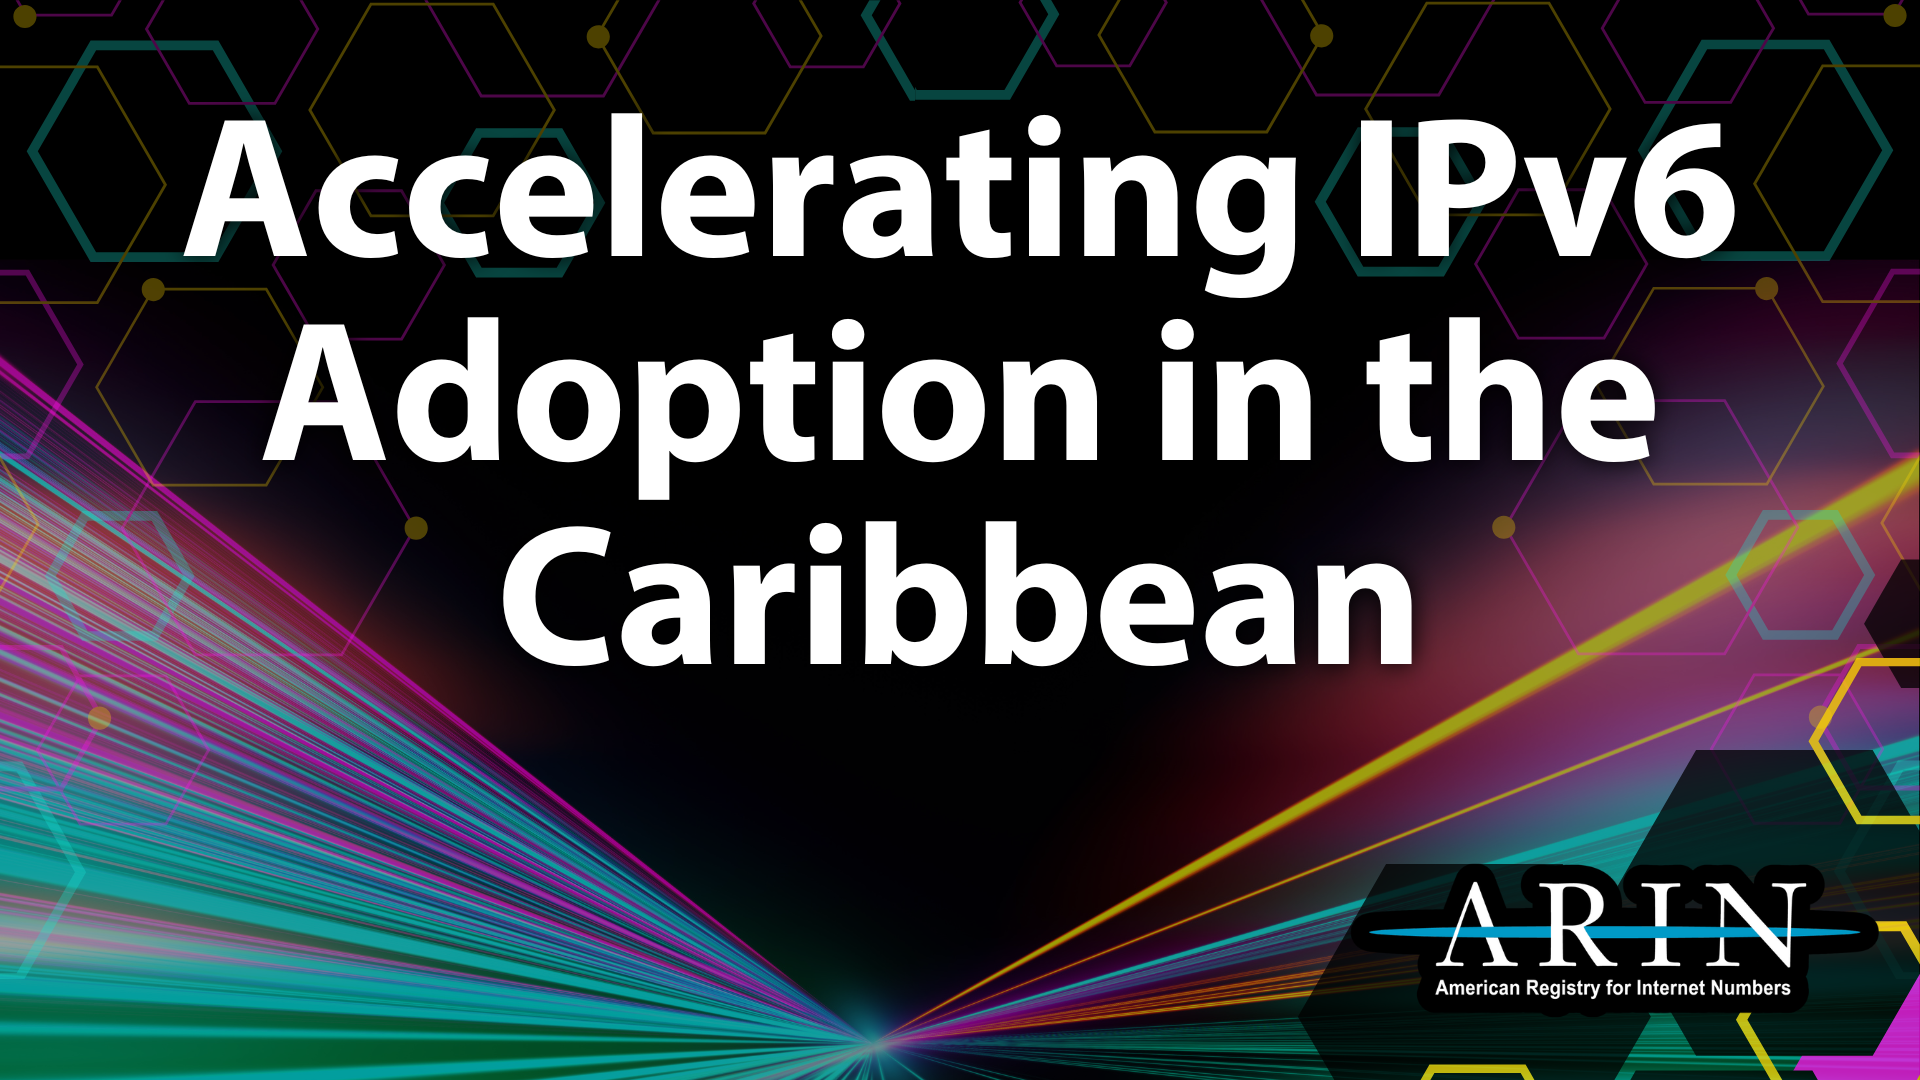 Accelerating IPv6 Adoption in the Caribbean